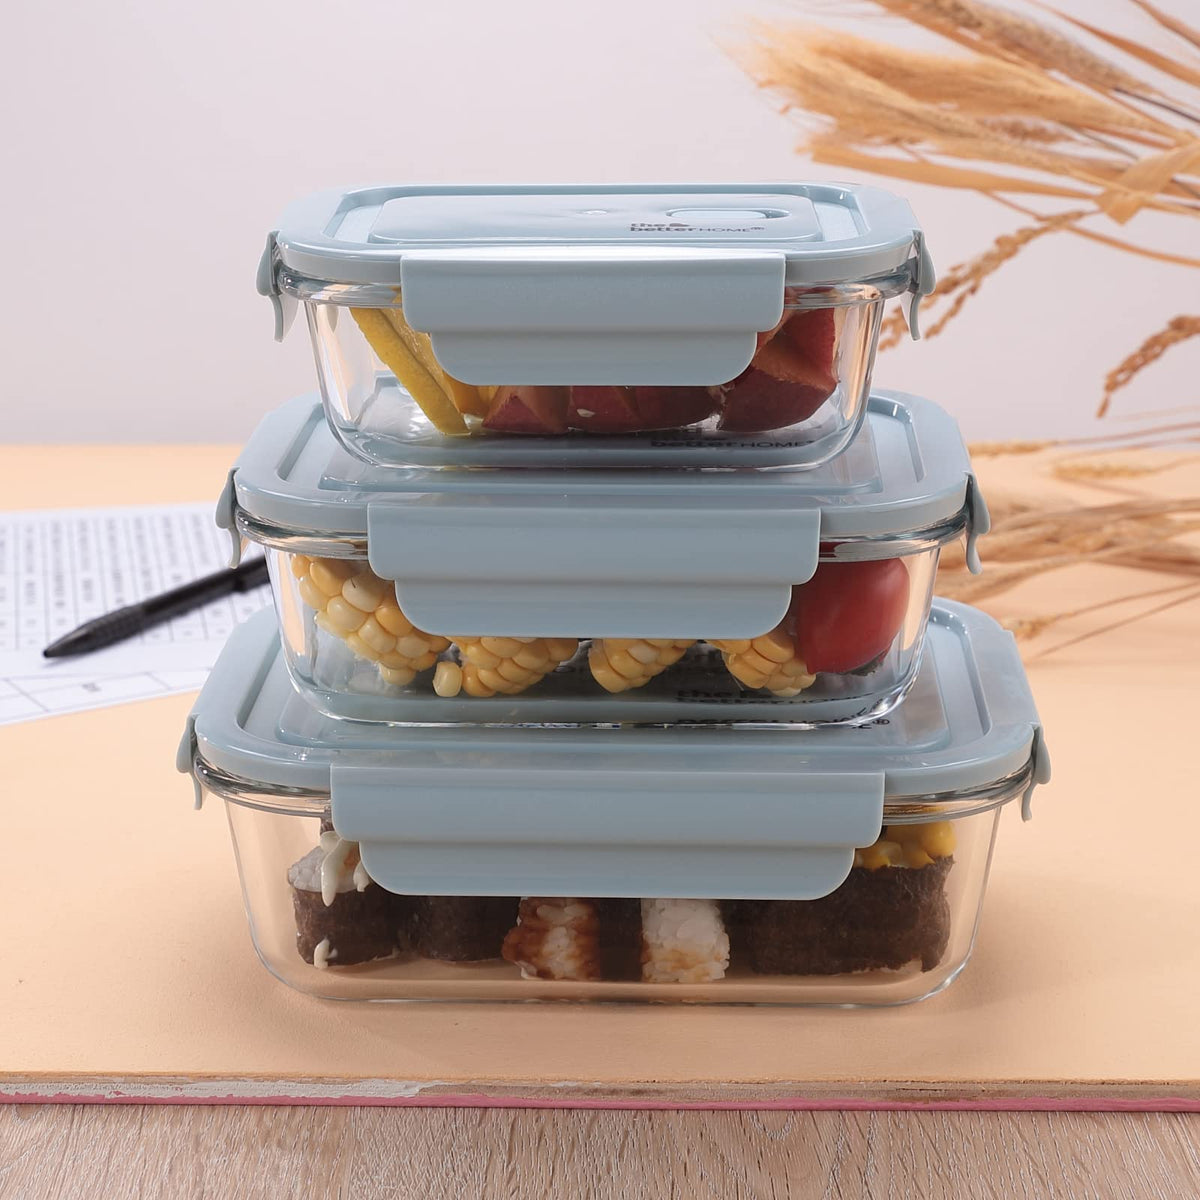 The Better Home Borosilicate Glass Lunch Box Set of 3 (1040ml, 680ml, 410ml) Tiffin Box for Office for Men Women | Lunch Box for Women School Kids | Microwave Safe Leak Proof Airtight Lunch Box| Blue